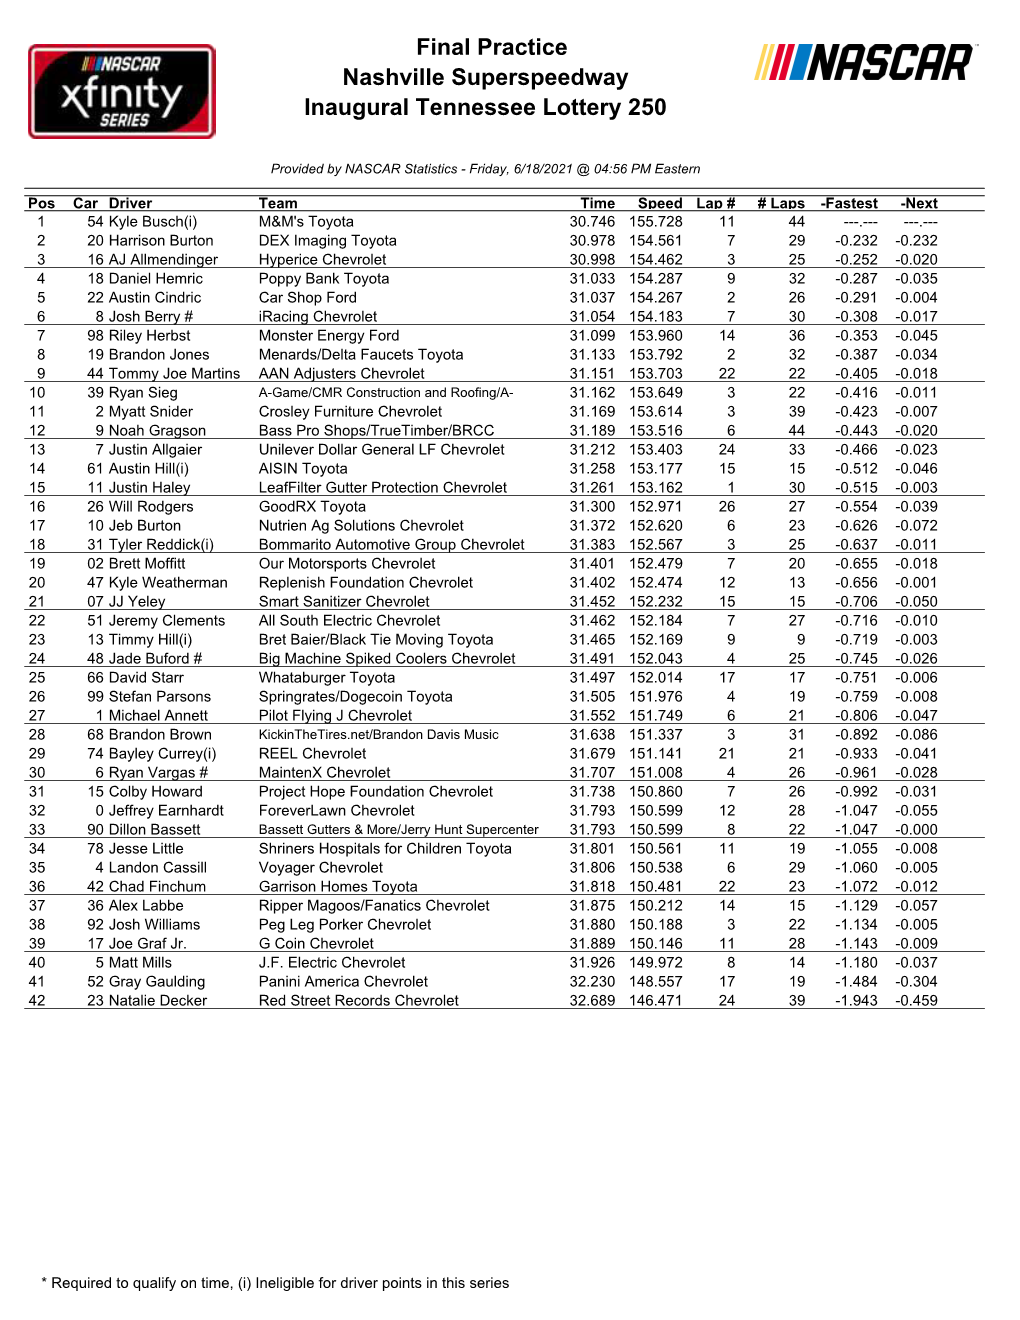 Final Practice Nashville Superspeedway Inaugural Tennessee Lottery 250